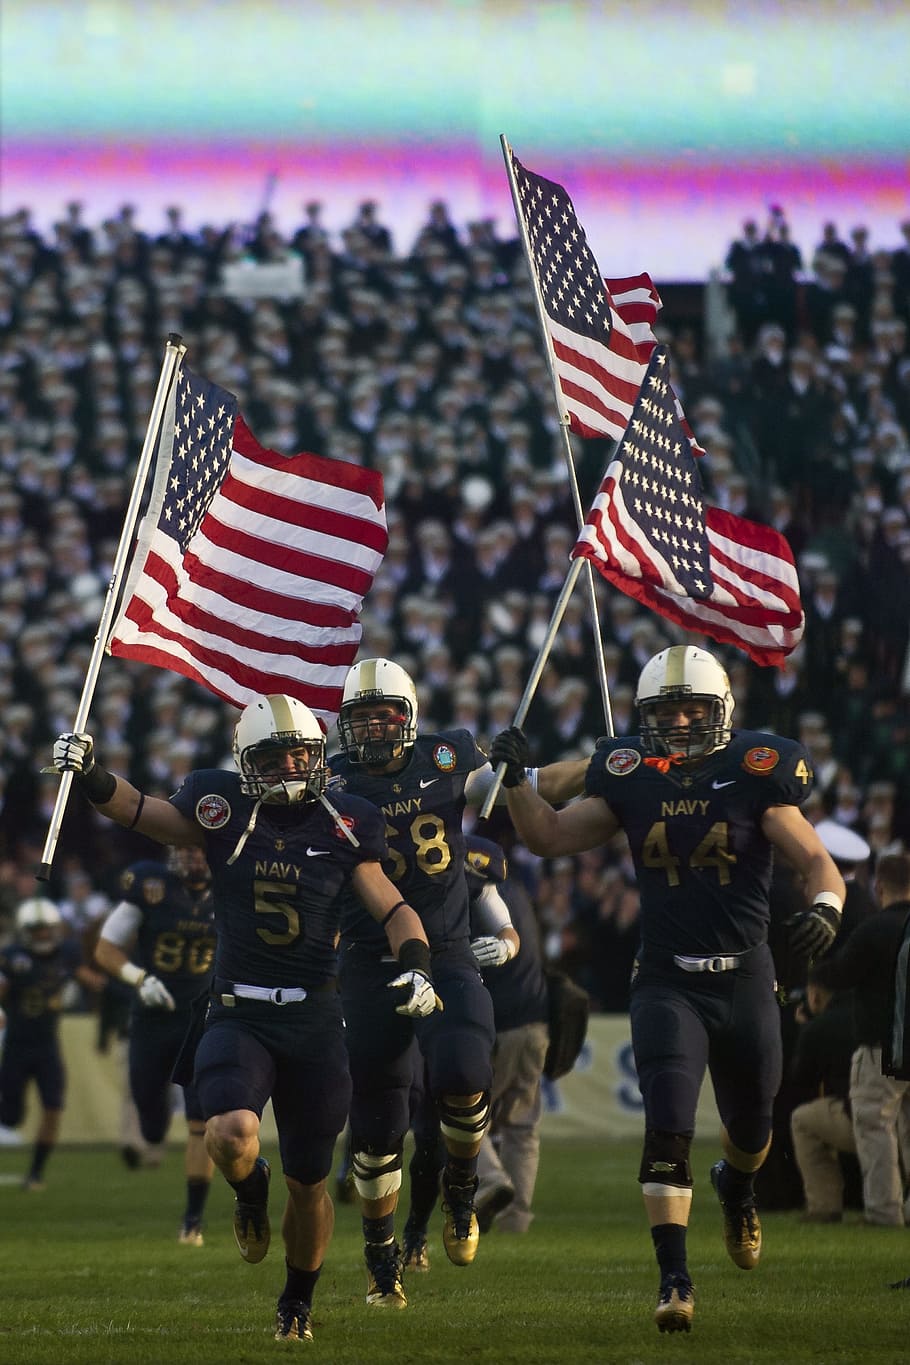 american football, army navy game, players, teams, field, sport, competition, stadium, play, action